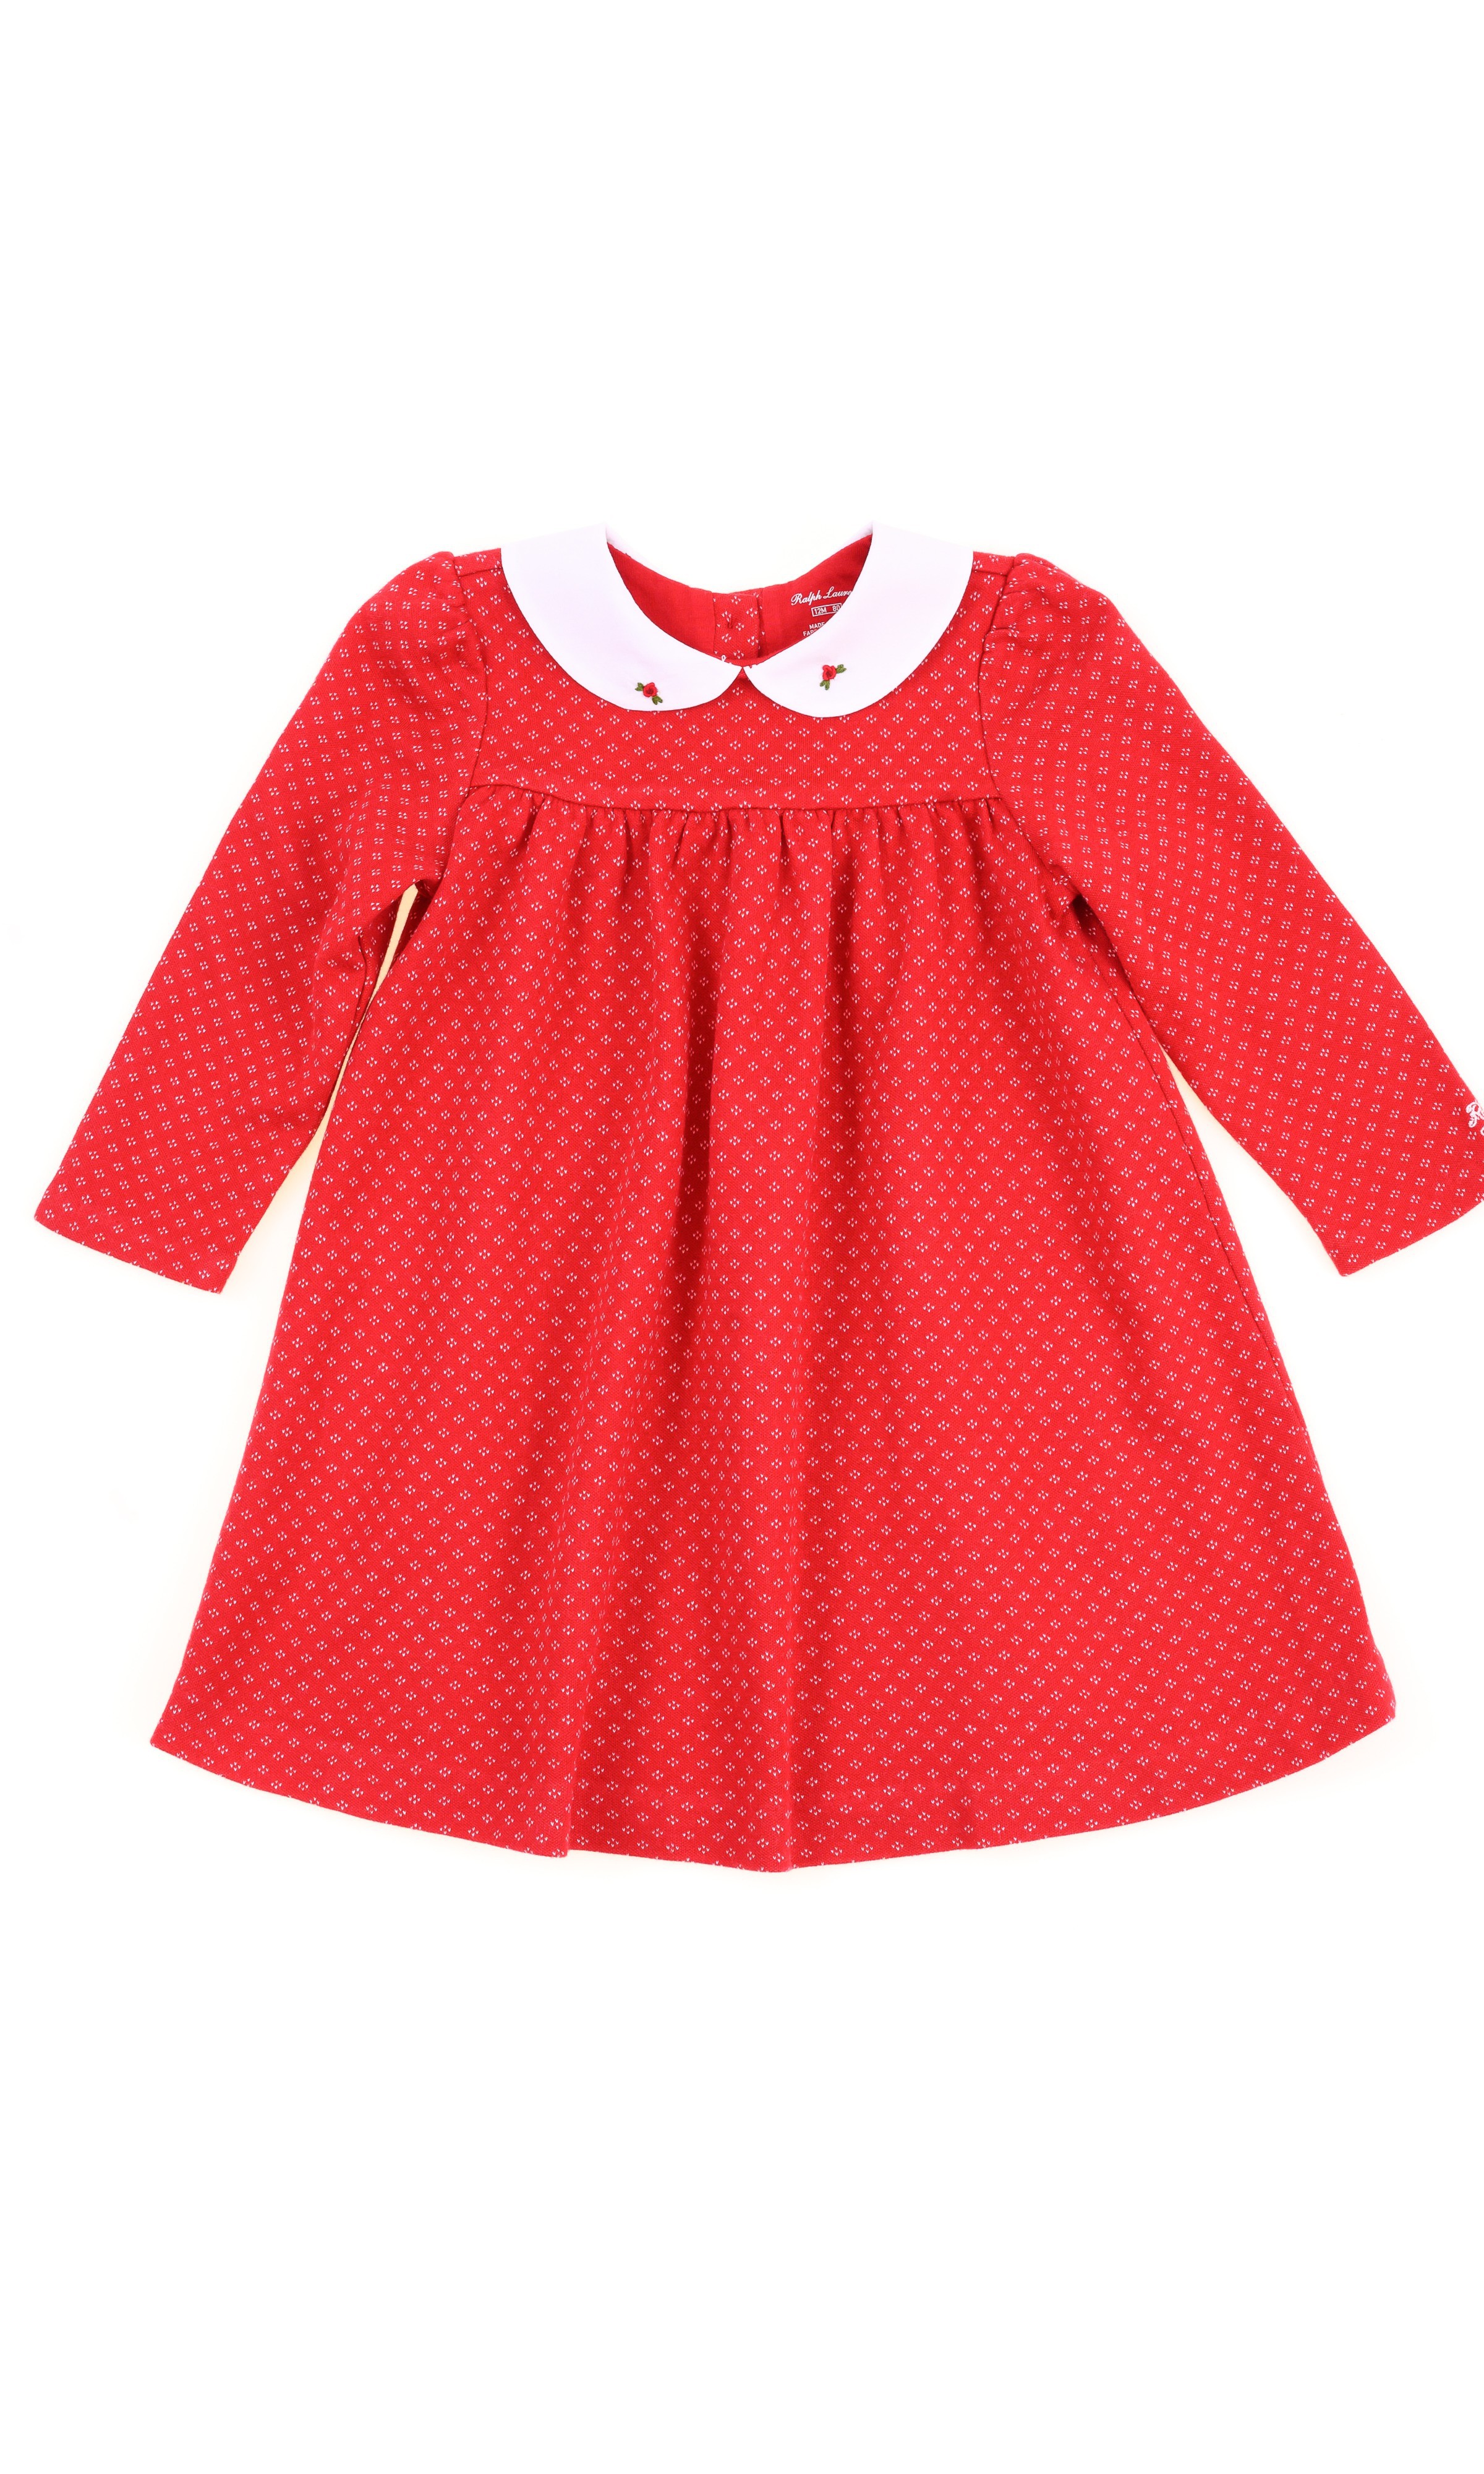 Robe Bebe Rouge A Manches Longues Ralph Lauren Celebrity Club